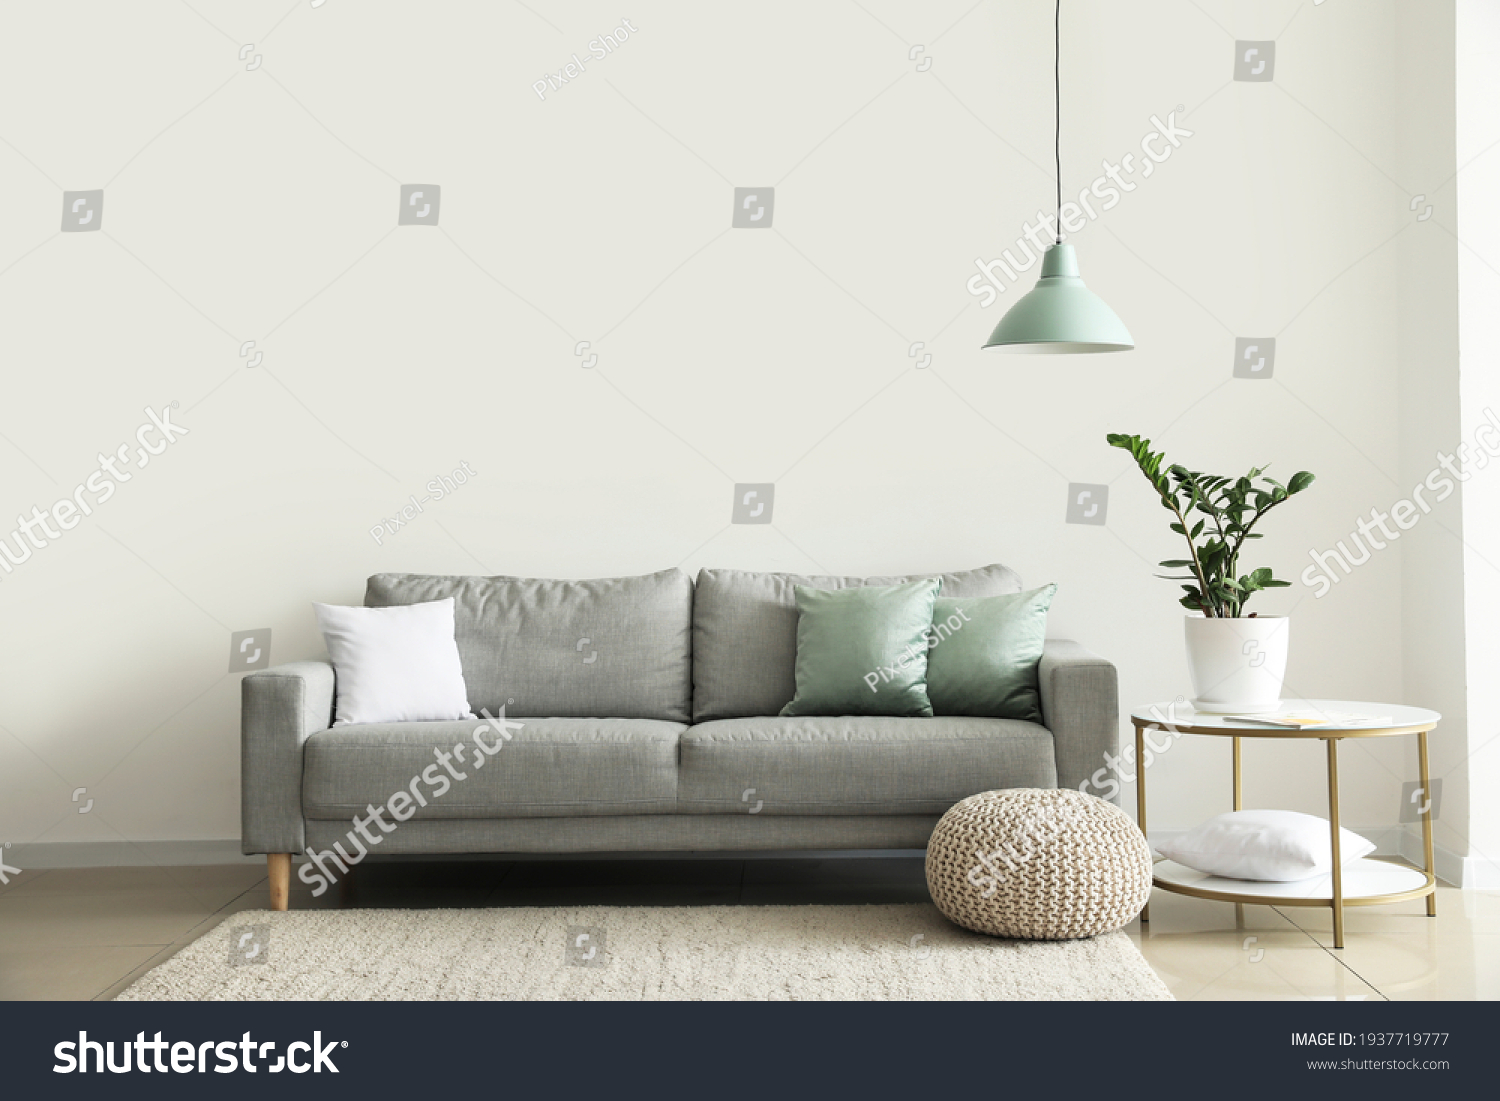 Interior of modern room with comfortable sofa #1937719777